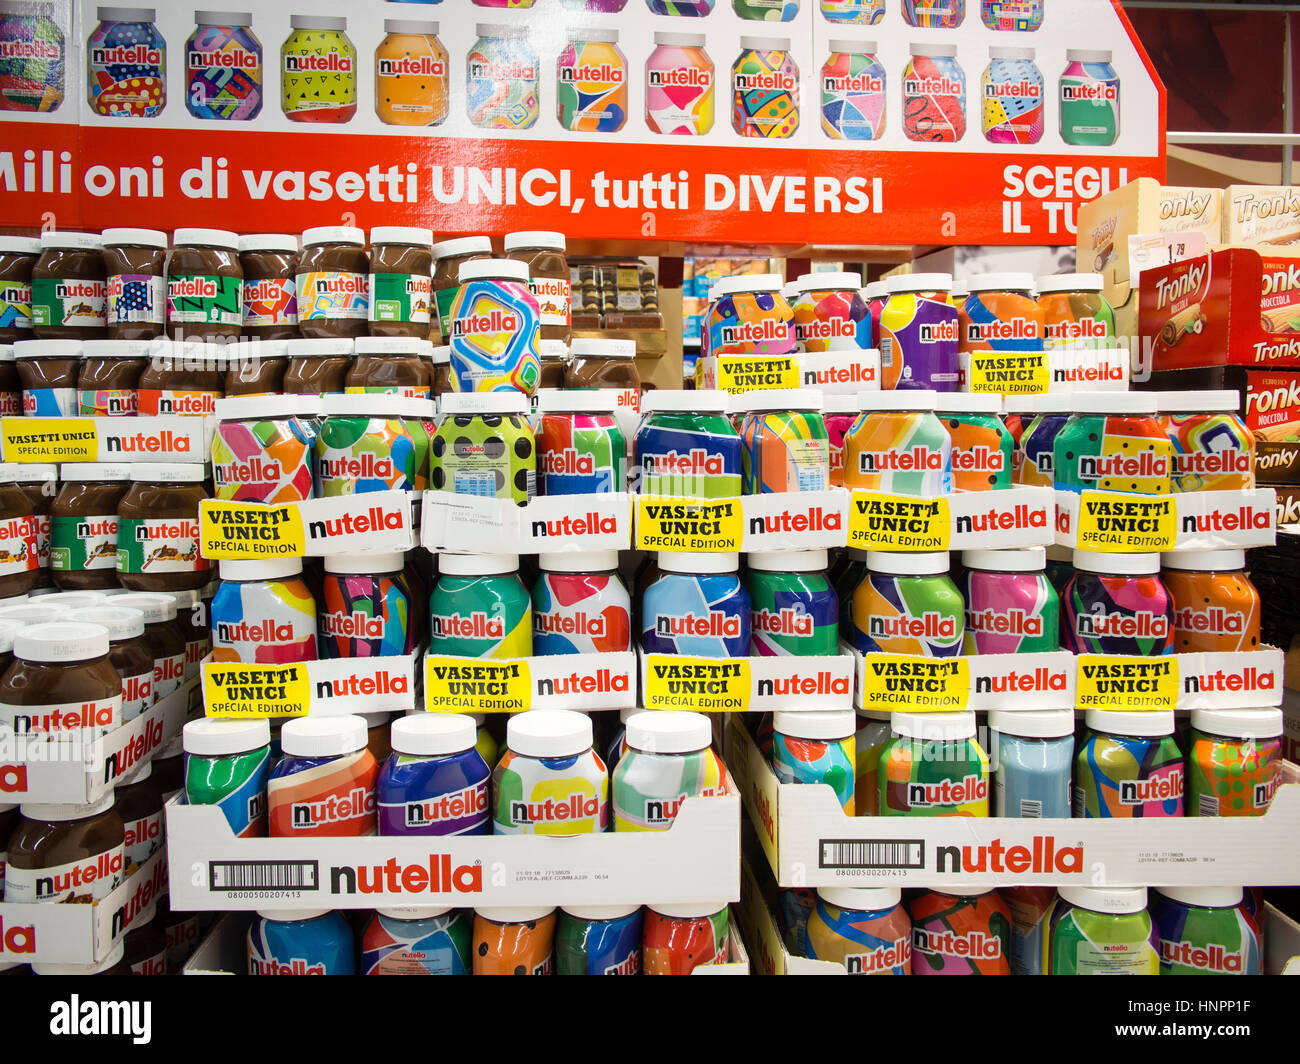 Limited Edition Nutella, 2017 Italy Stock Photo